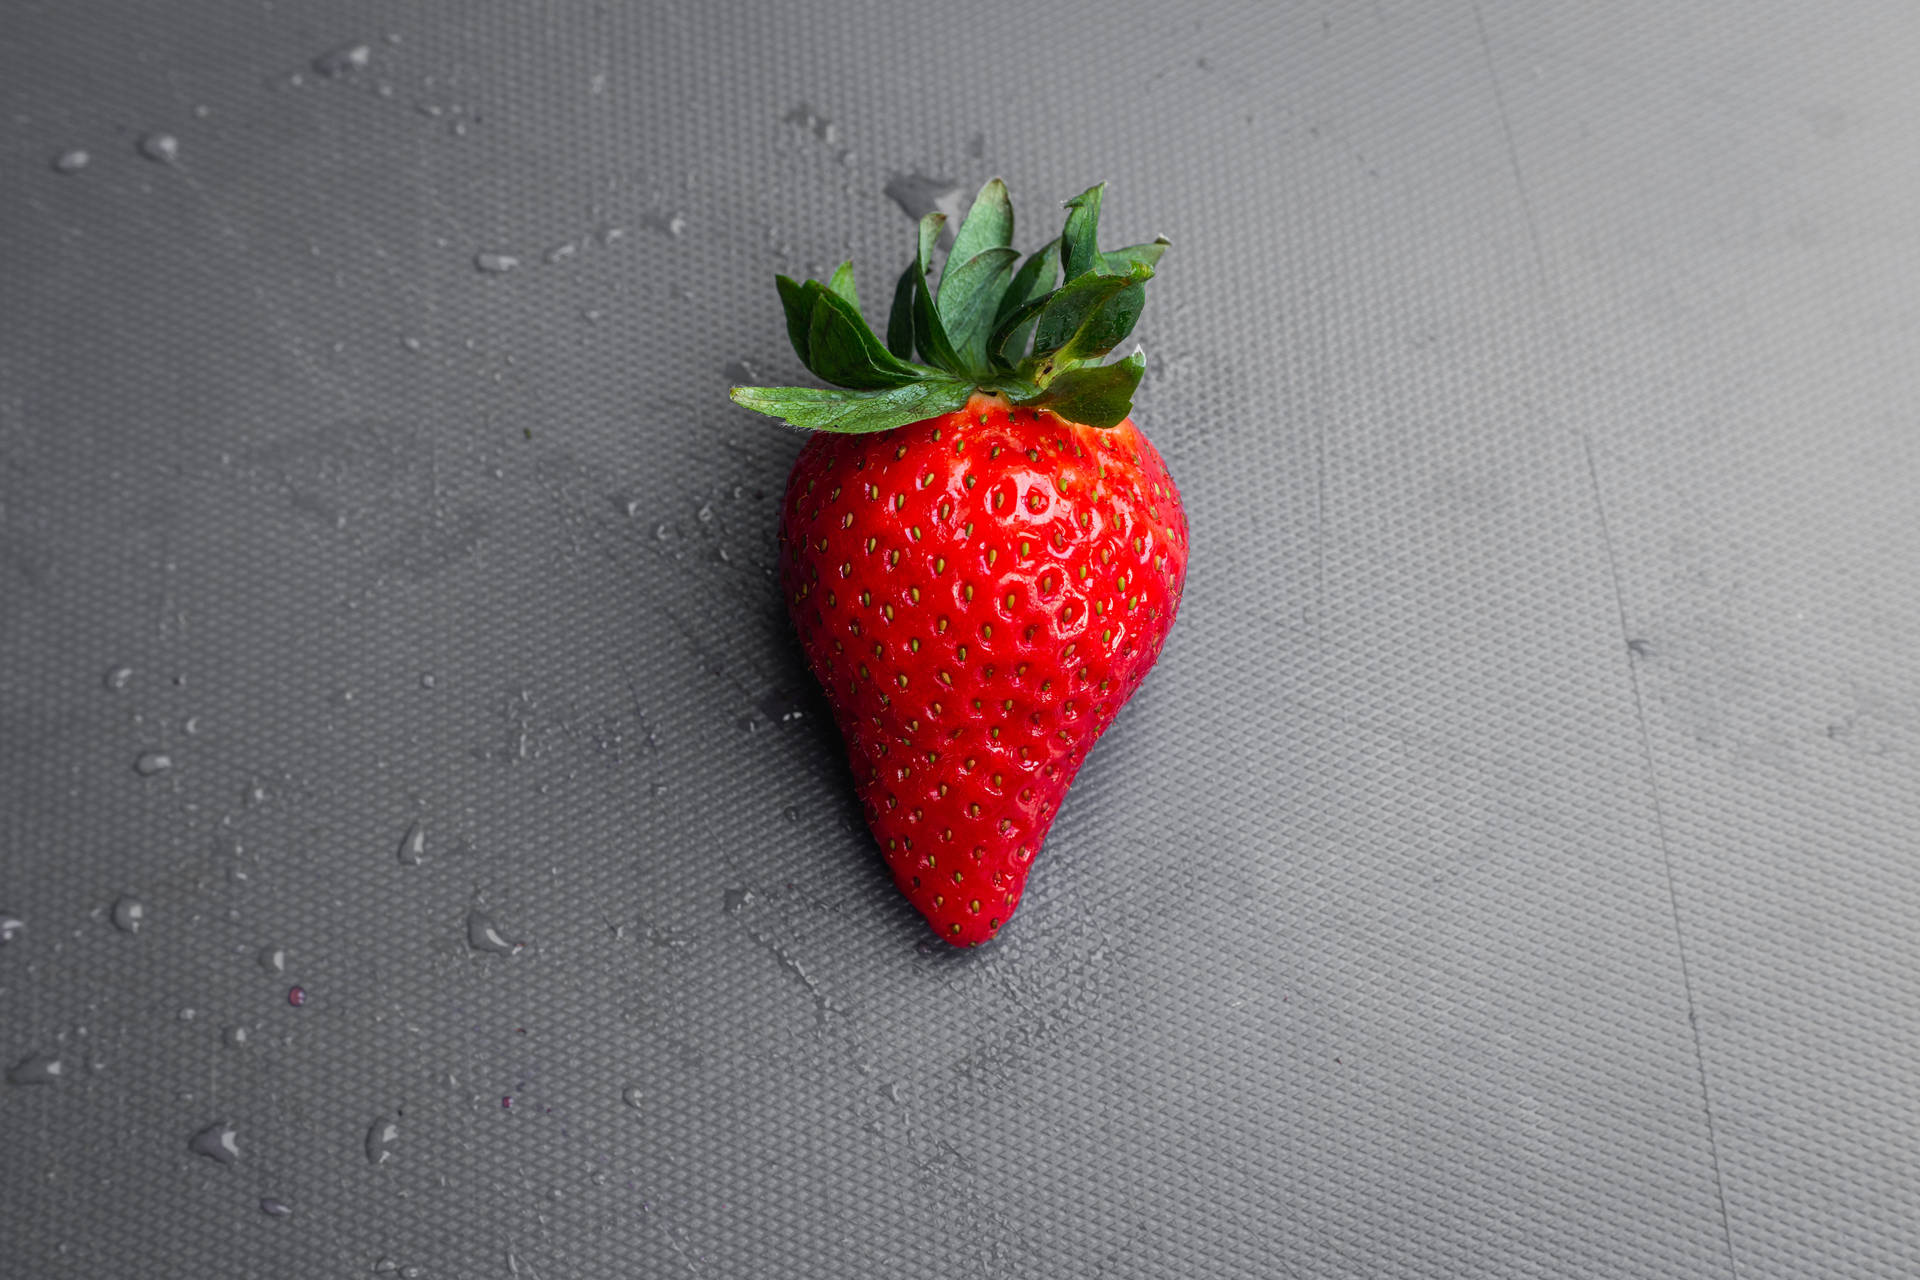 Strawberry 5472X3648 Wallpaper and Background Image